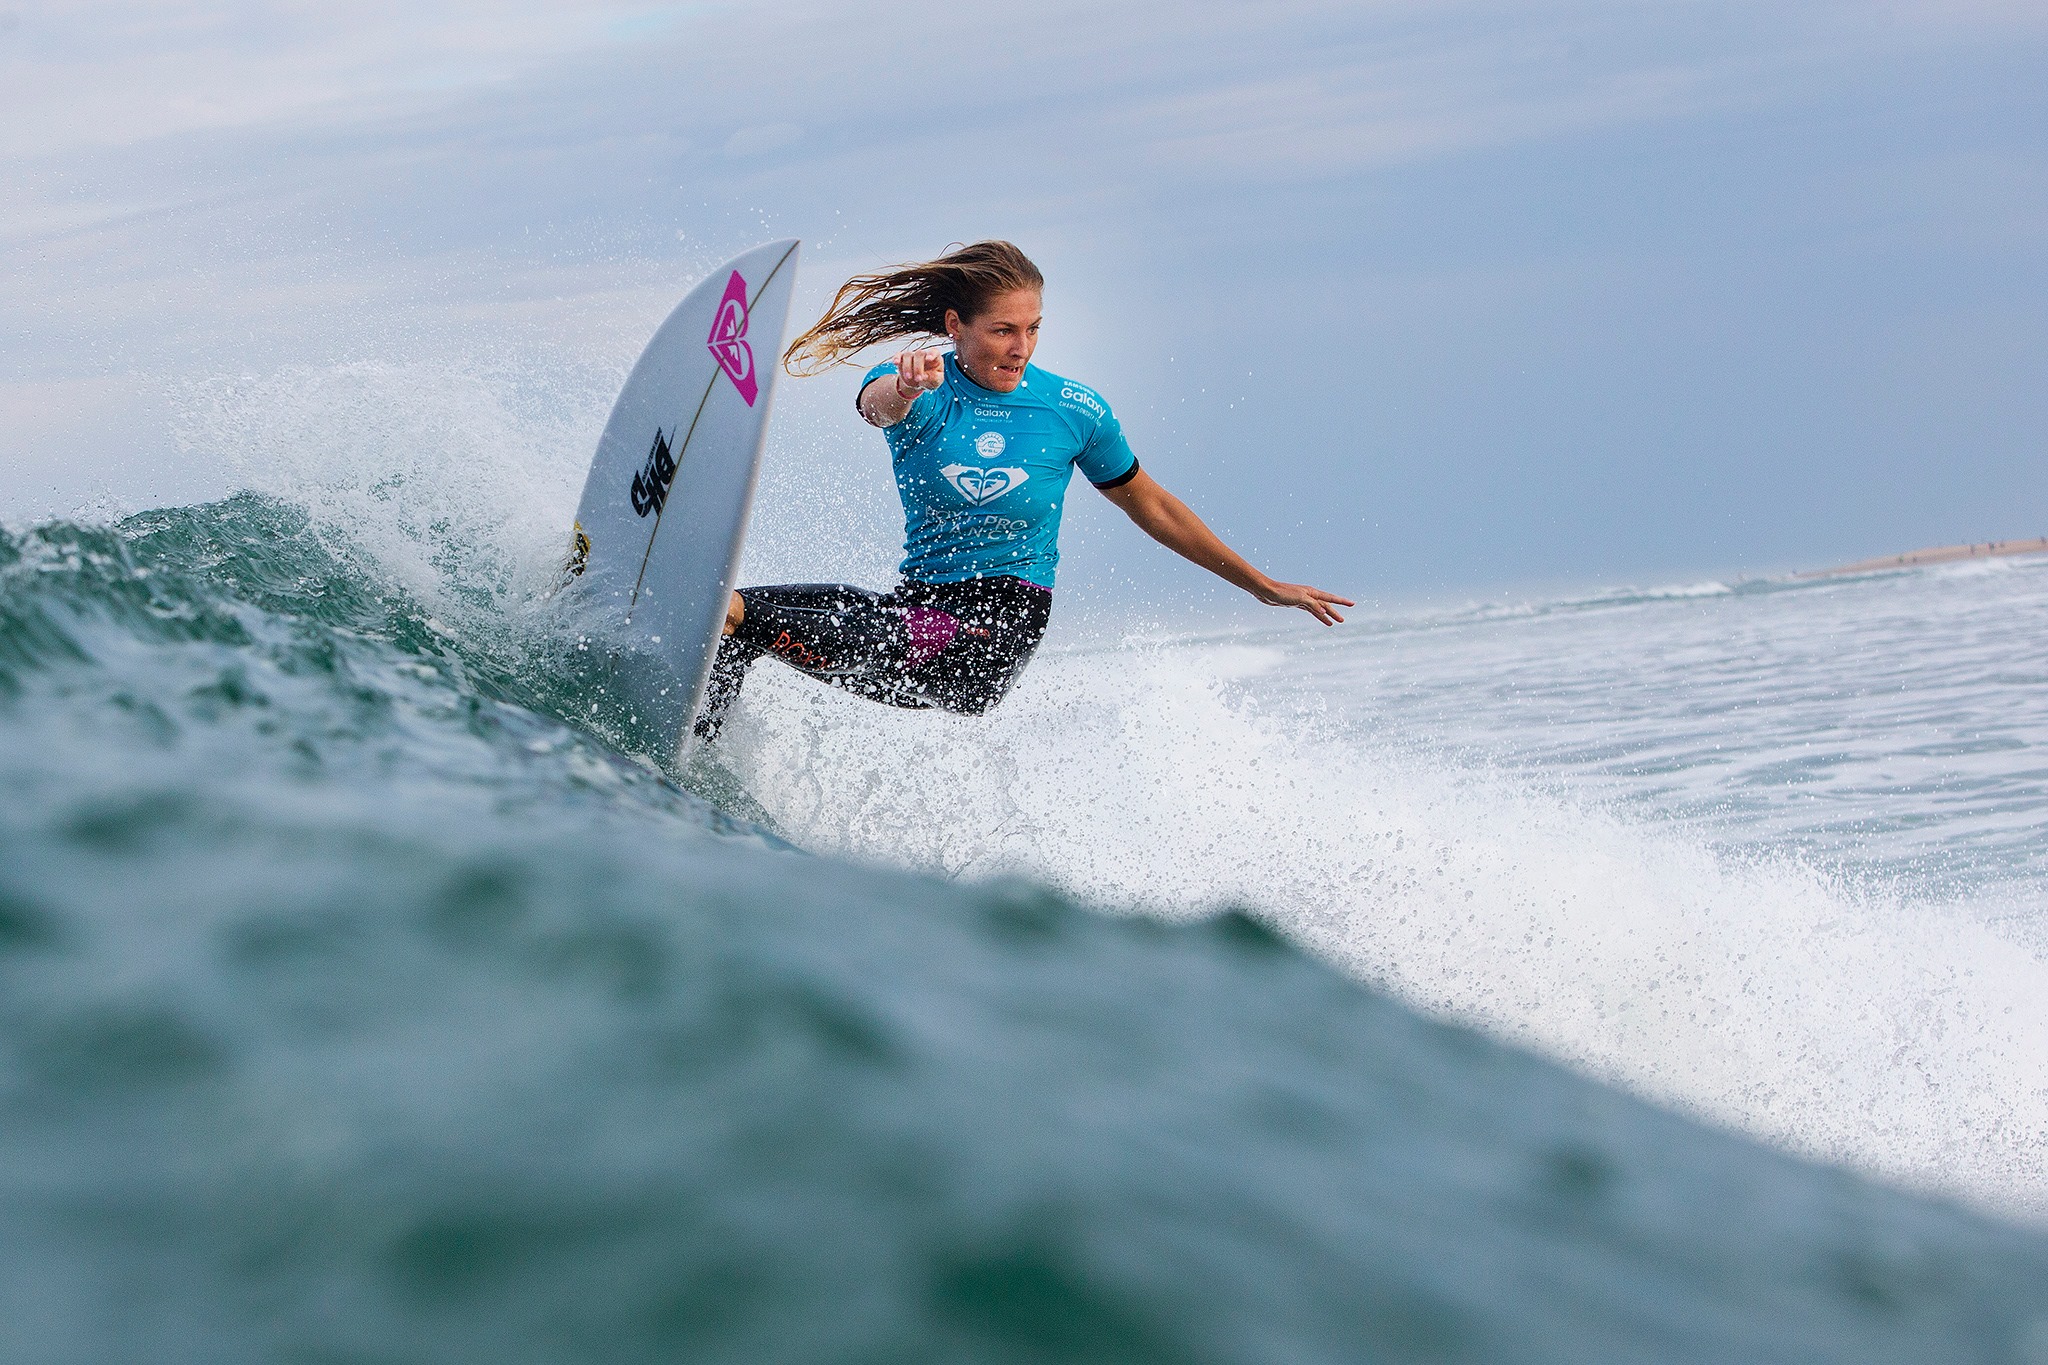 Round 3 at the #ROXYpro France